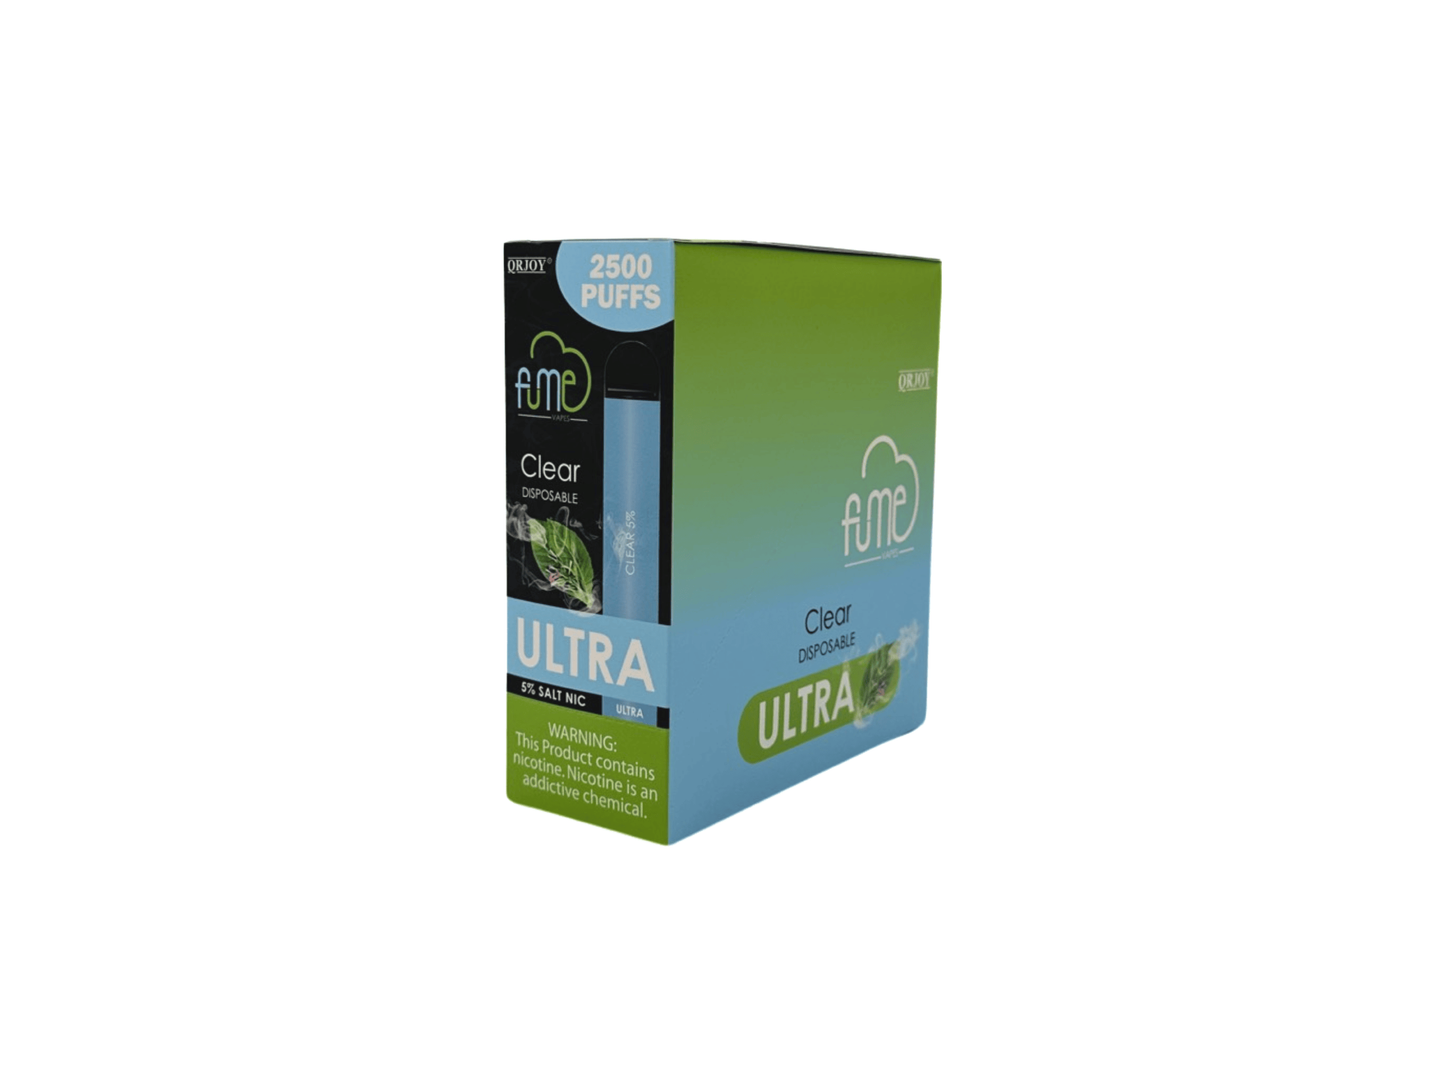 Fume Ultra Clear flavored disposable vape device big box.